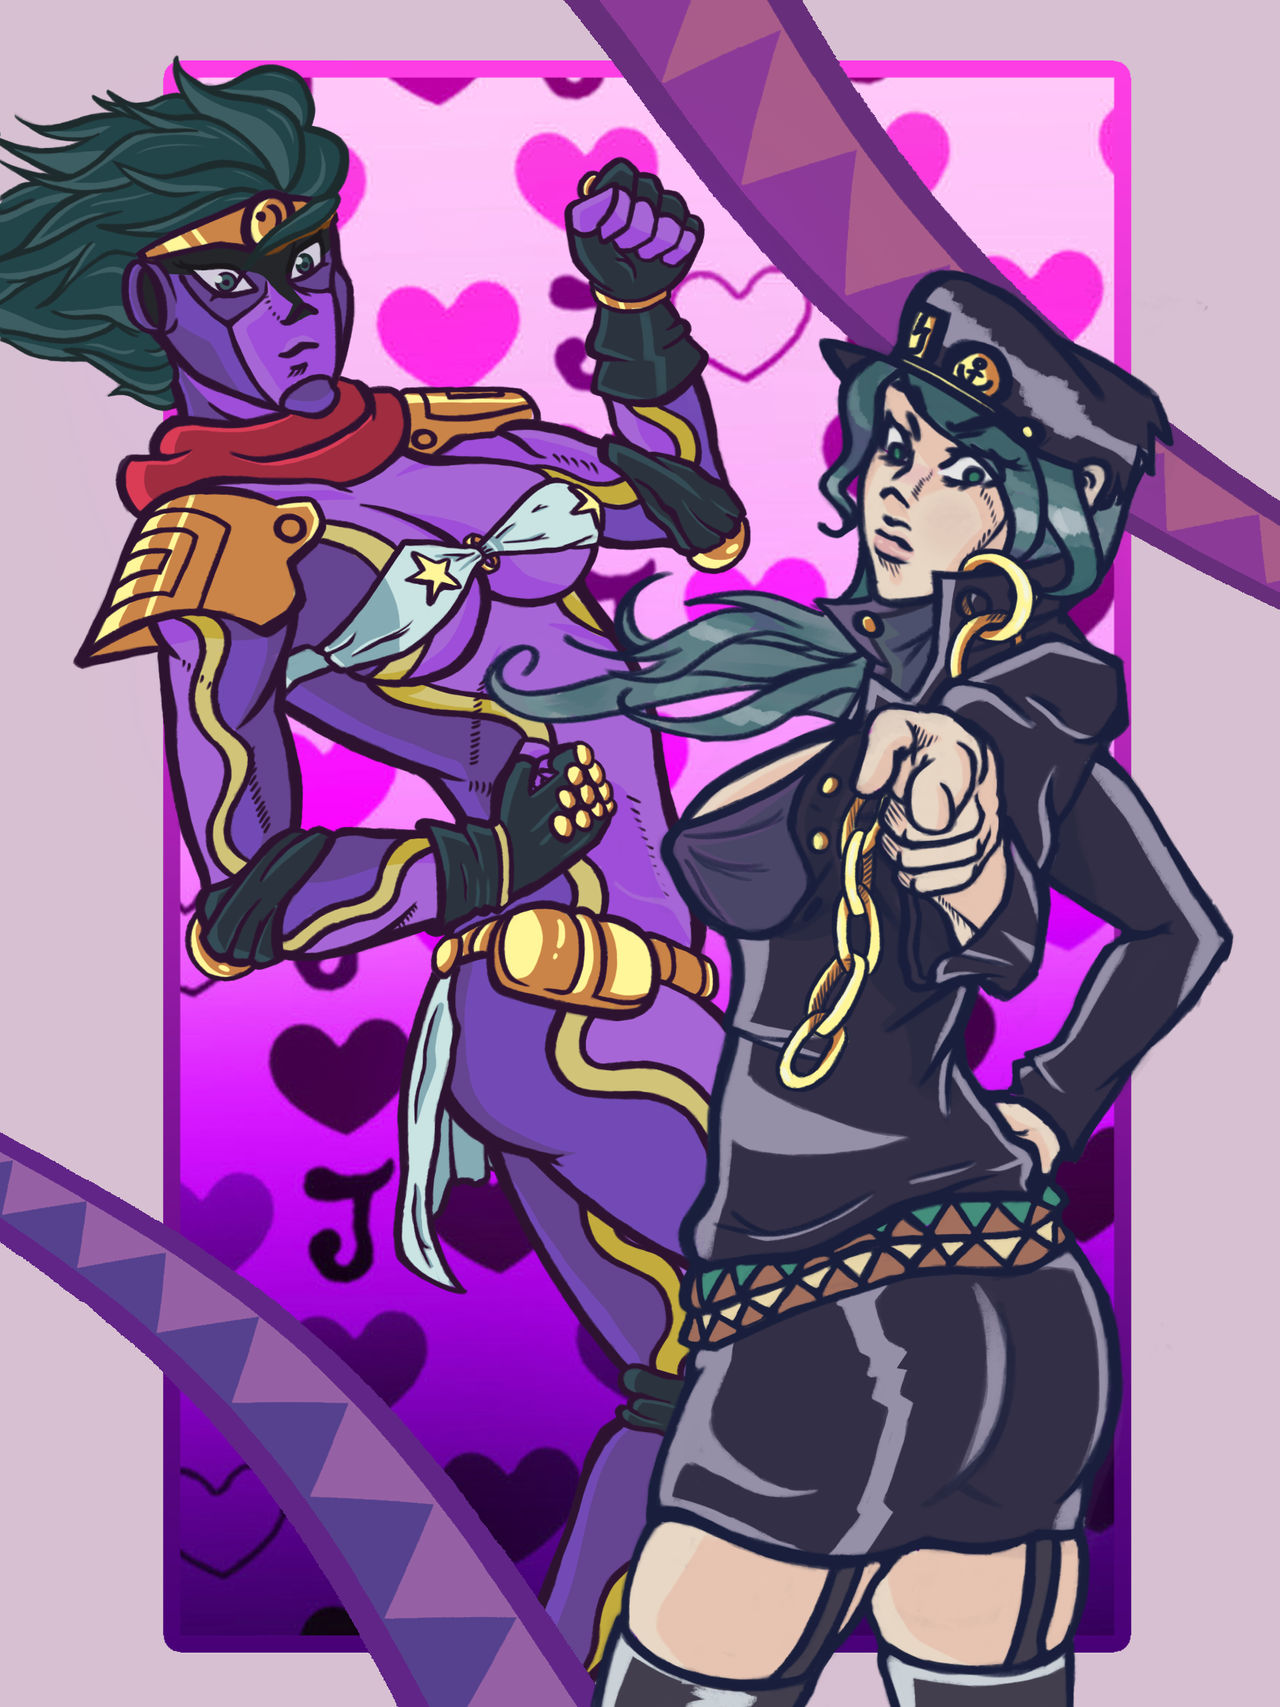 ⭐️Star platinum will ORA you⭐️ After drawing Fem Jotaro people asked for Star  Platinum! So I finally got around to doing a design for them…